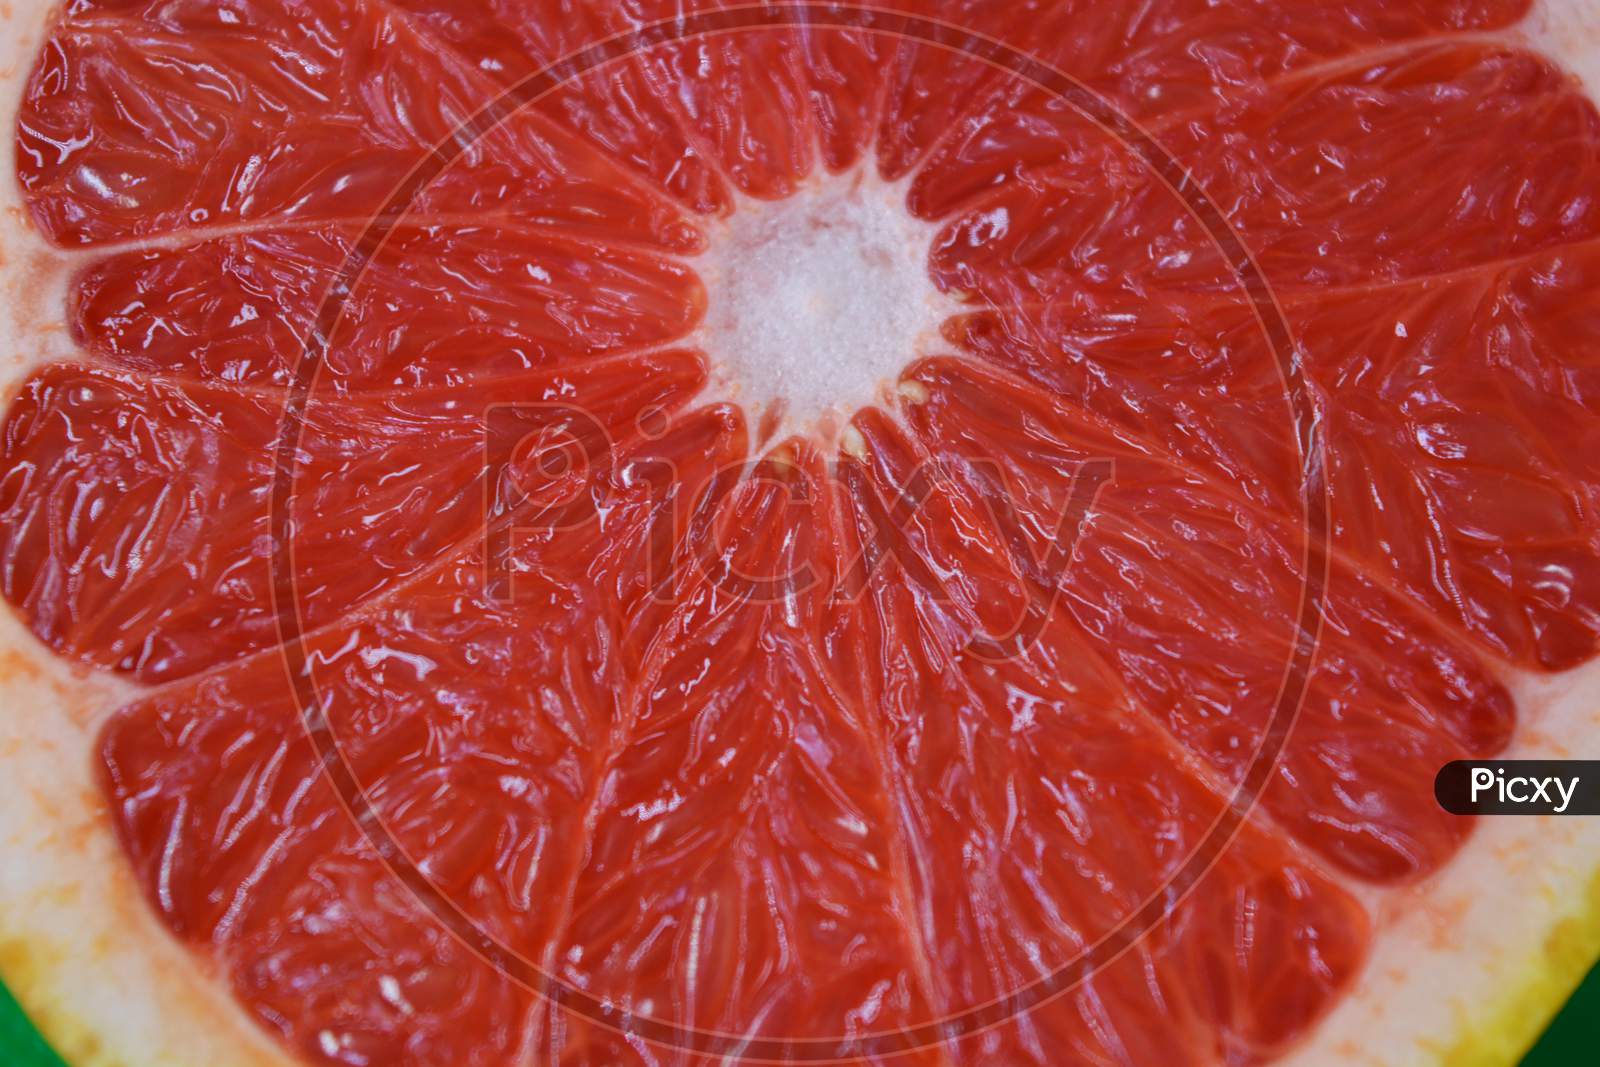 Ripe and tasty fruits, fresh grapefruit cut in half, sliced grapefruit set on a green fabric background.